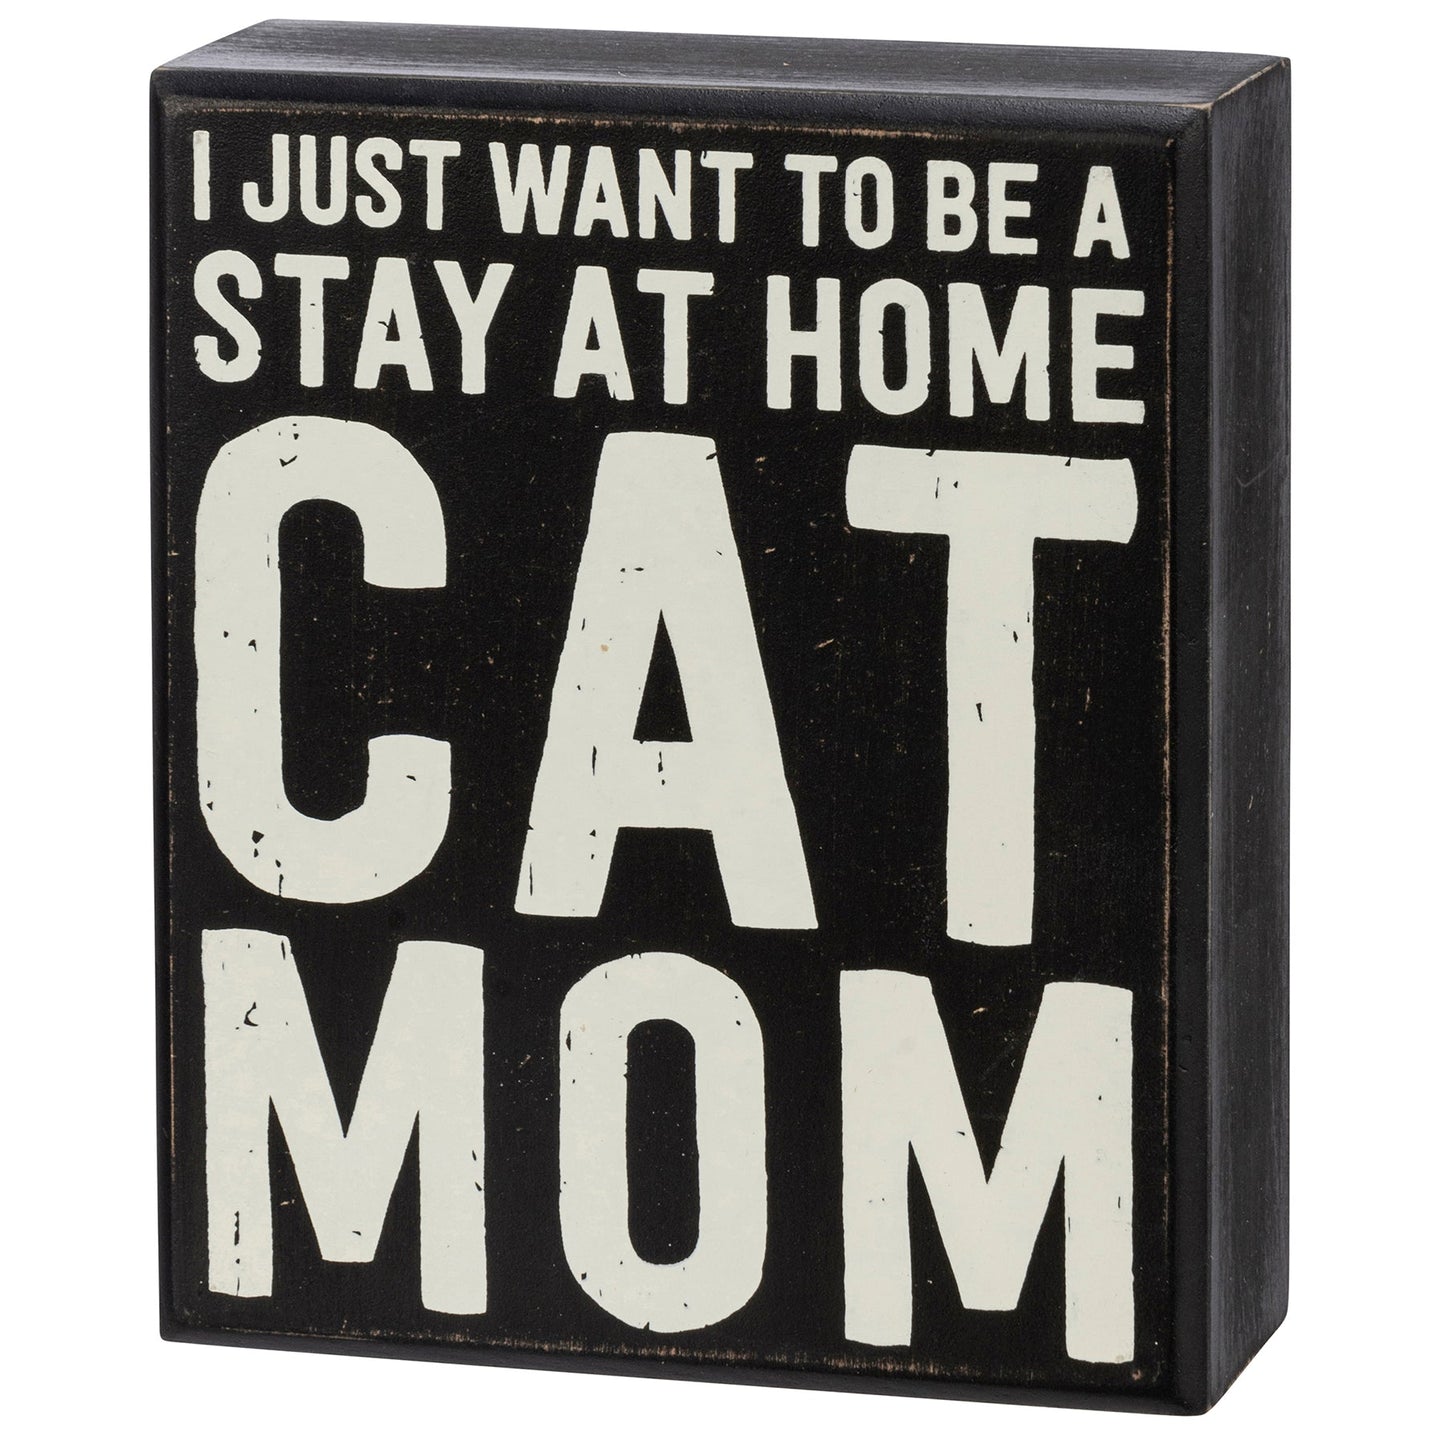 My Kids Have Paws Cat Mom Box Sign And Candle Giftable Set